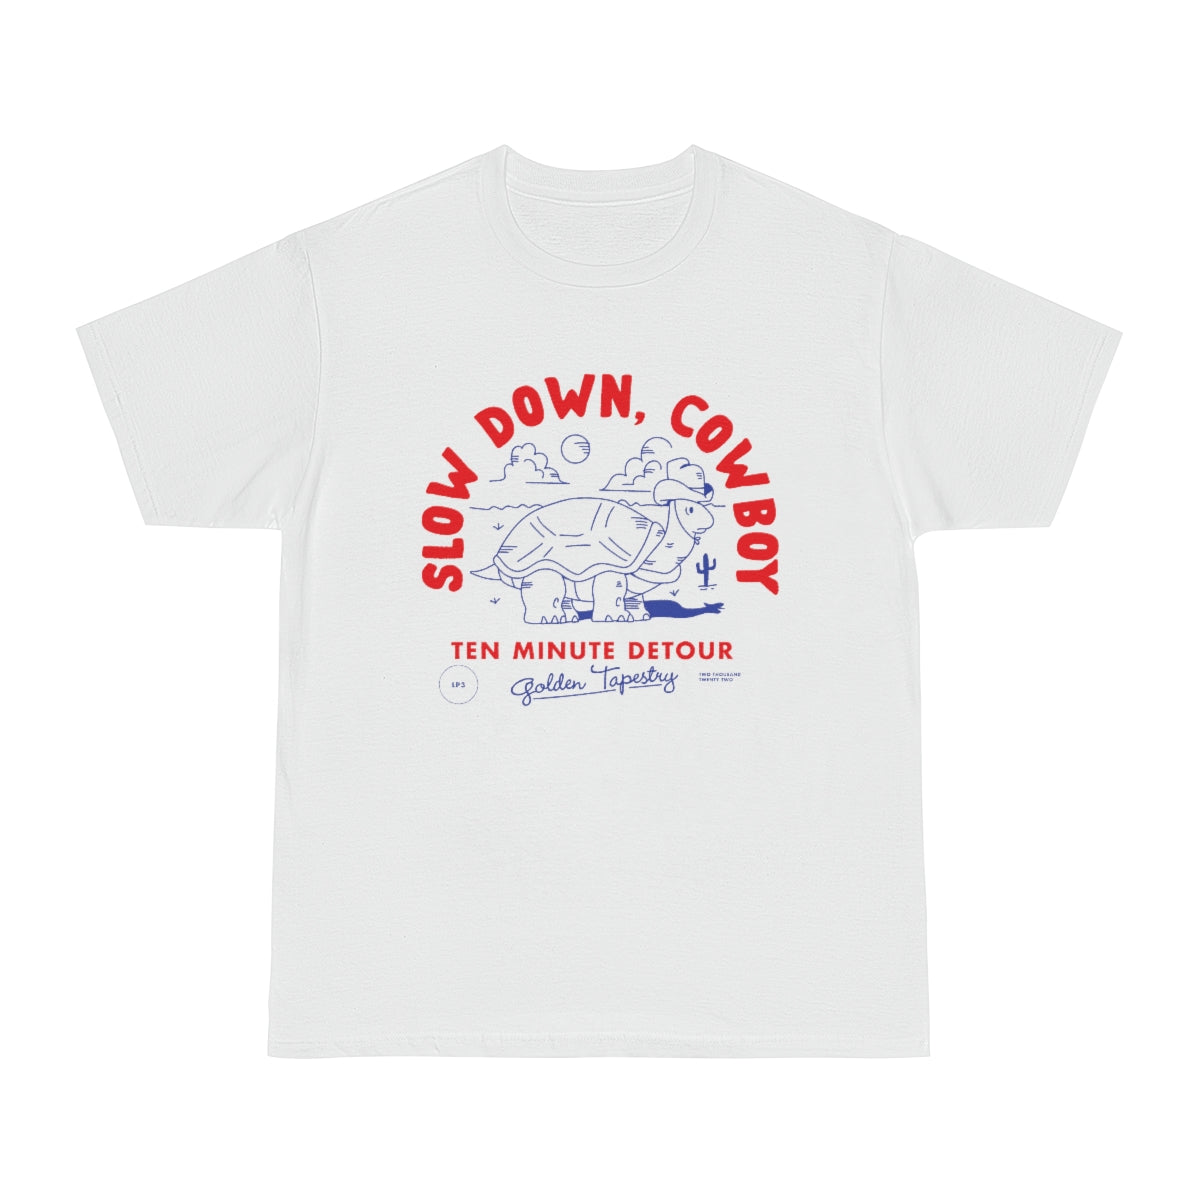 "Slow Down Cowboy" Golden Tapestry Tee